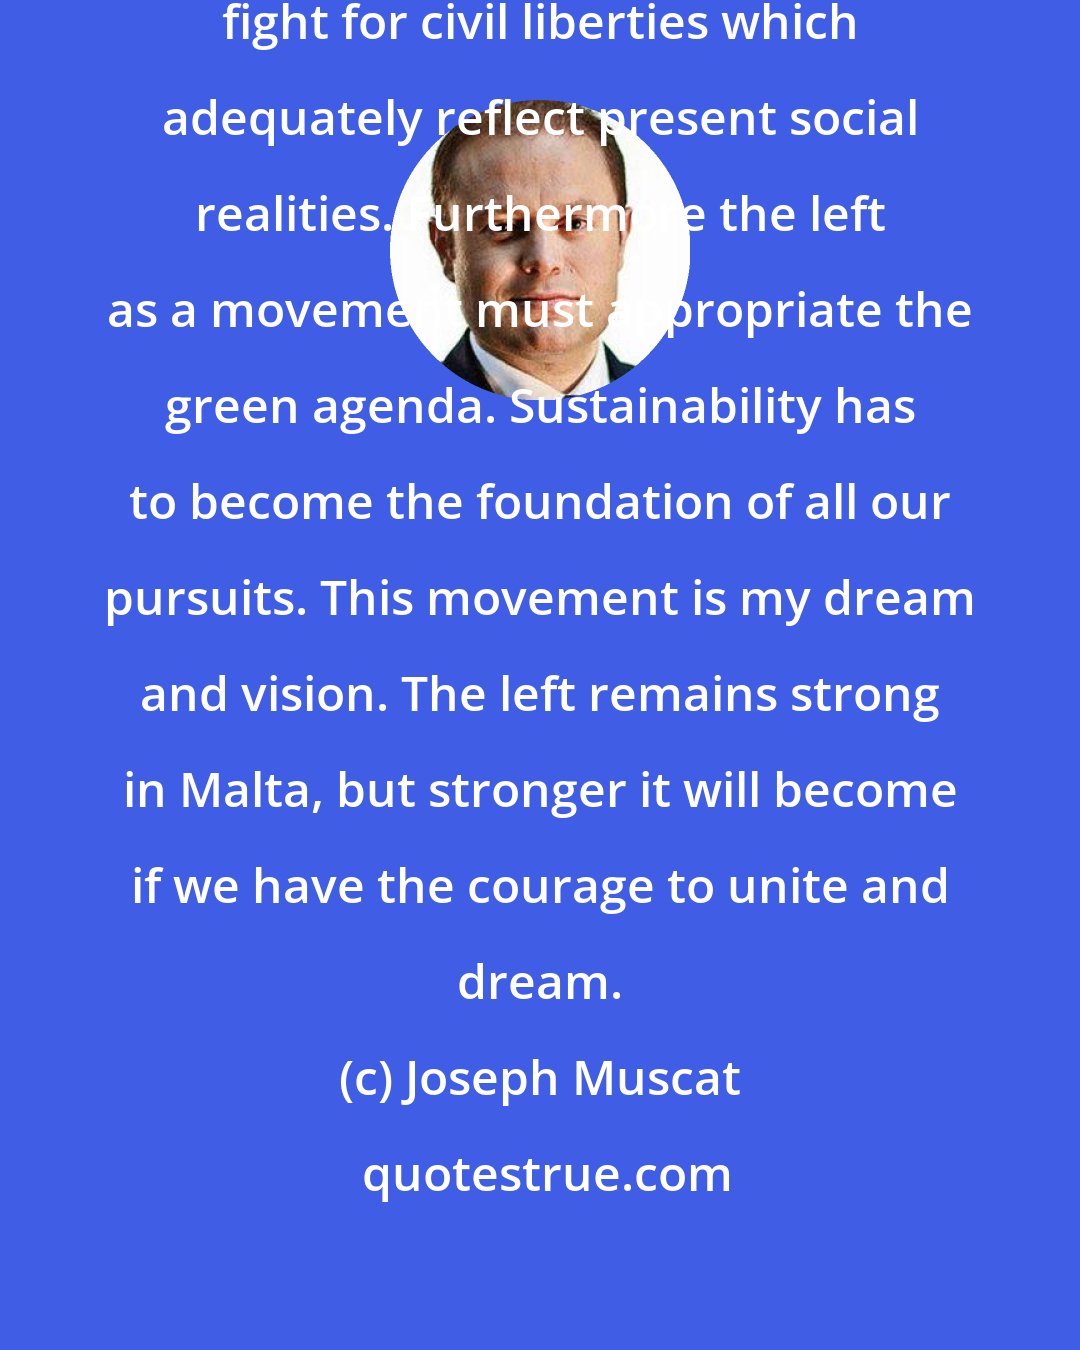 Joseph Muscat: We should be active leaders in the fight for civil liberties which adequately reflect present social realities. Furthermore the left as a movement must appropriate the green agenda. Sustainability has to become the foundation of all our pursuits. This movement is my dream and vision. The left remains strong in Malta, but stronger it will become if we have the courage to unite and dream.